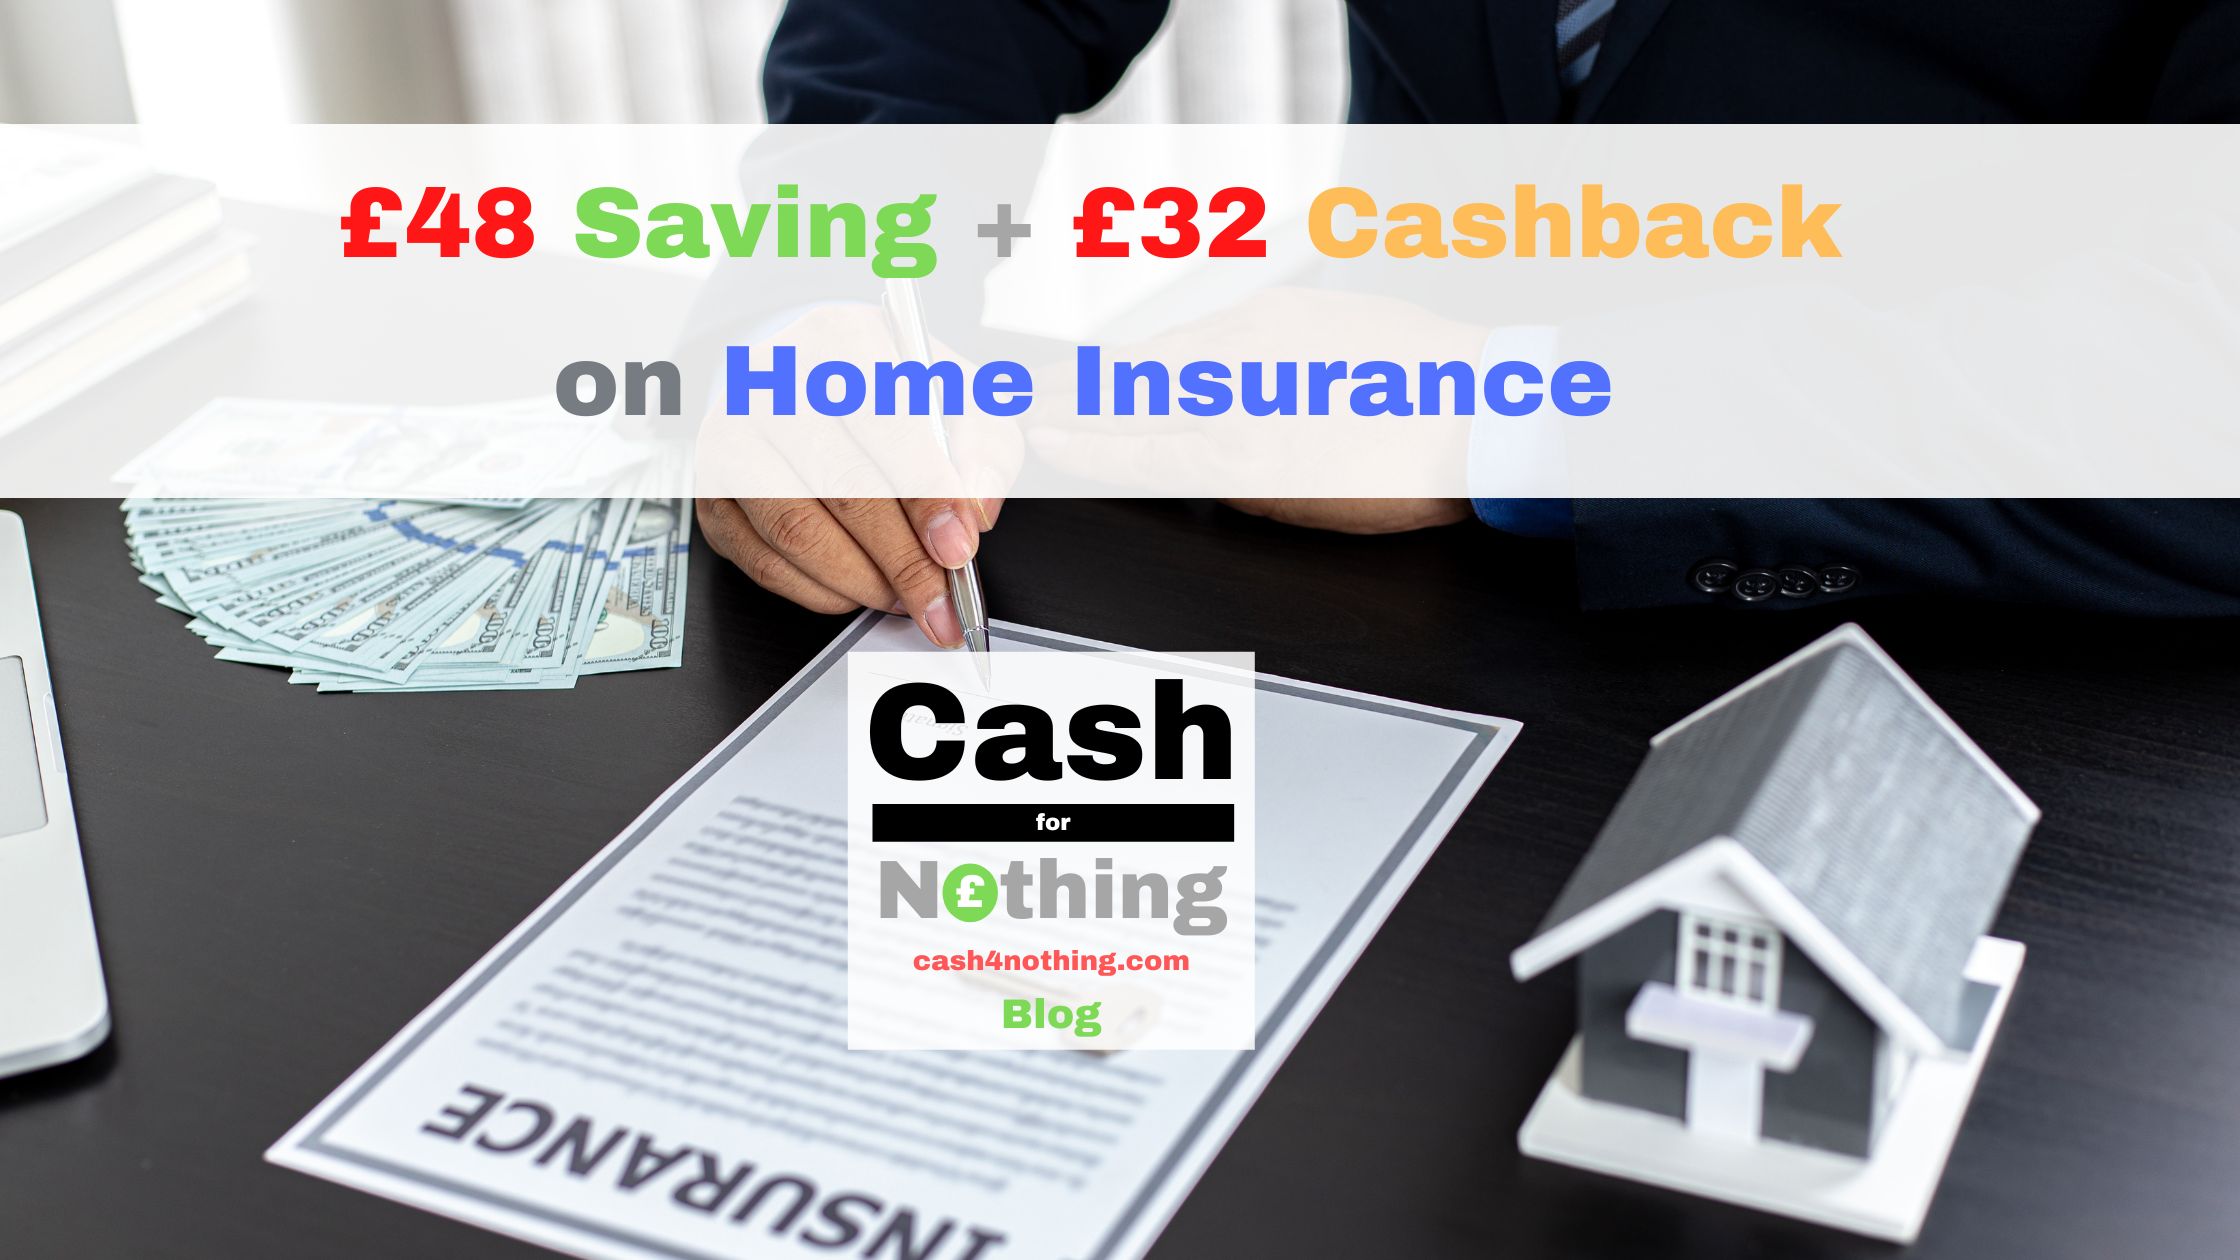 Best Cashback on Car Insurance + How to Save on Home Insurance